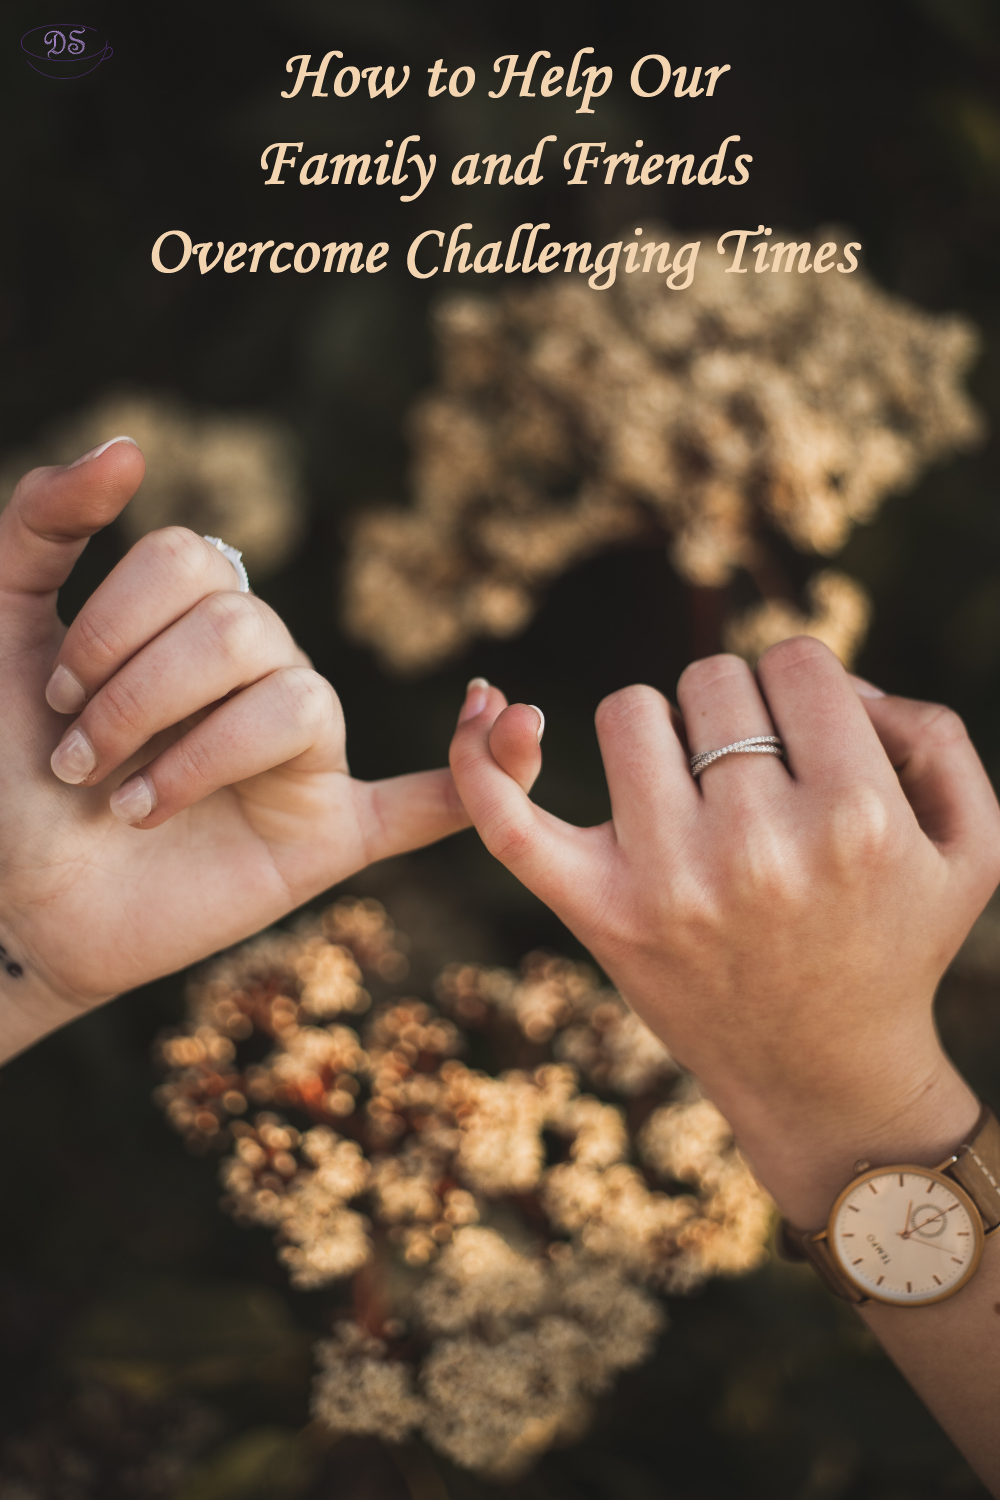 How to Help Our Family and Friends Overcome Challenging Times